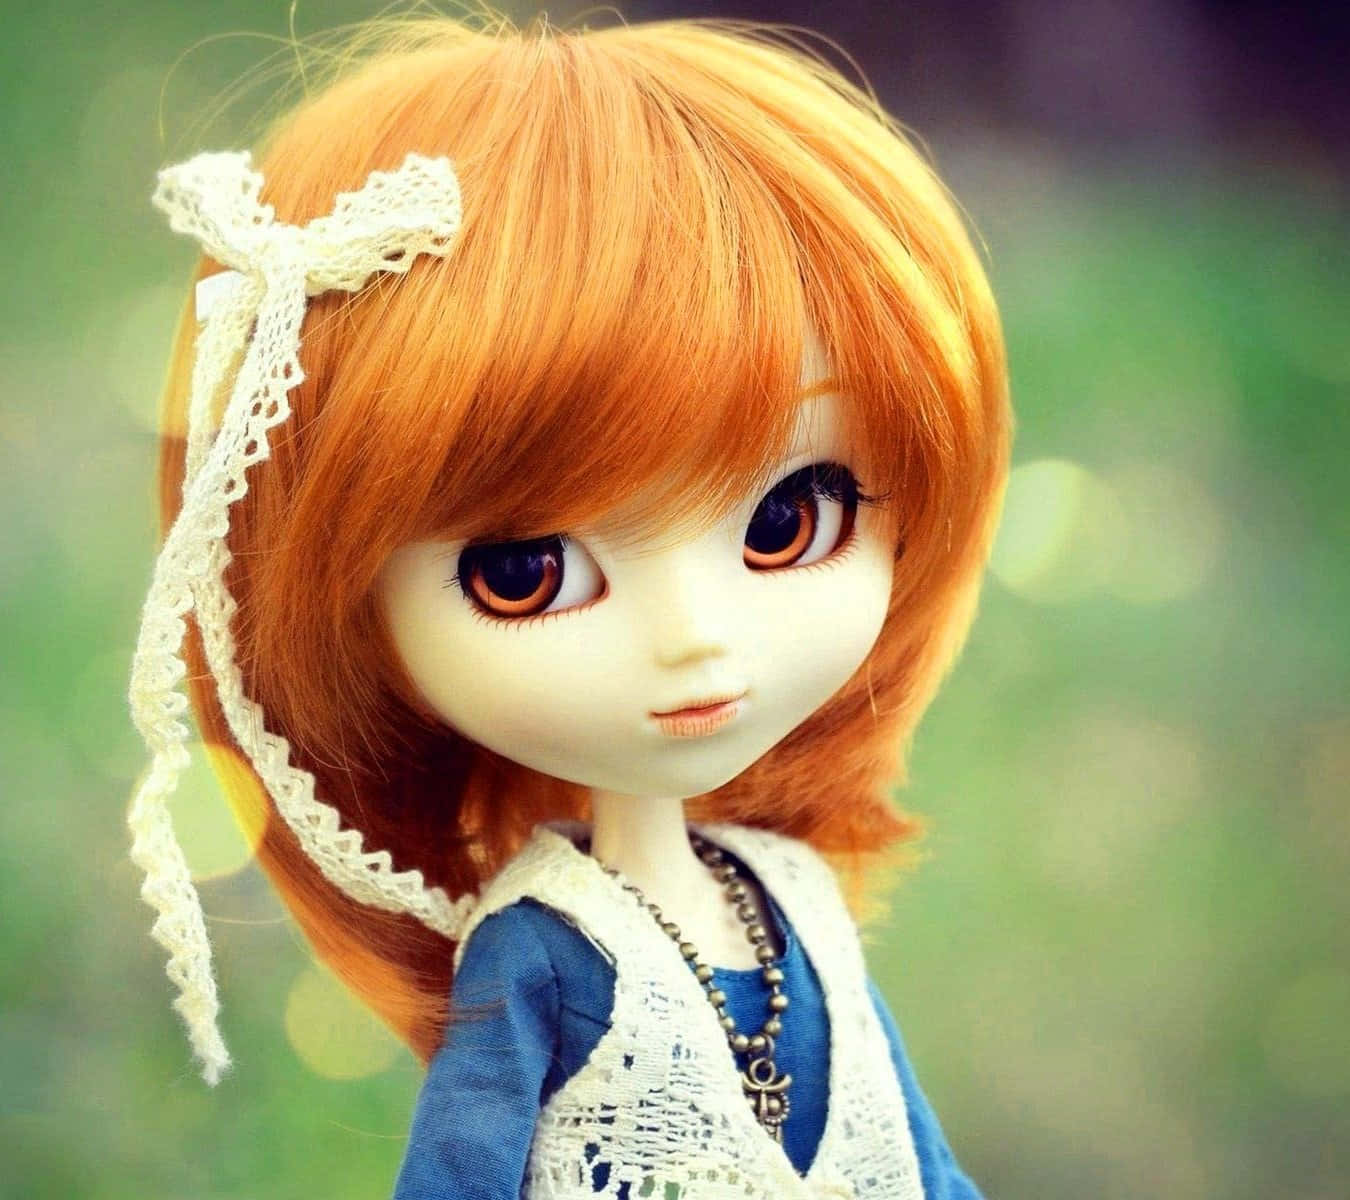 a doll with orange hair and a blue dress